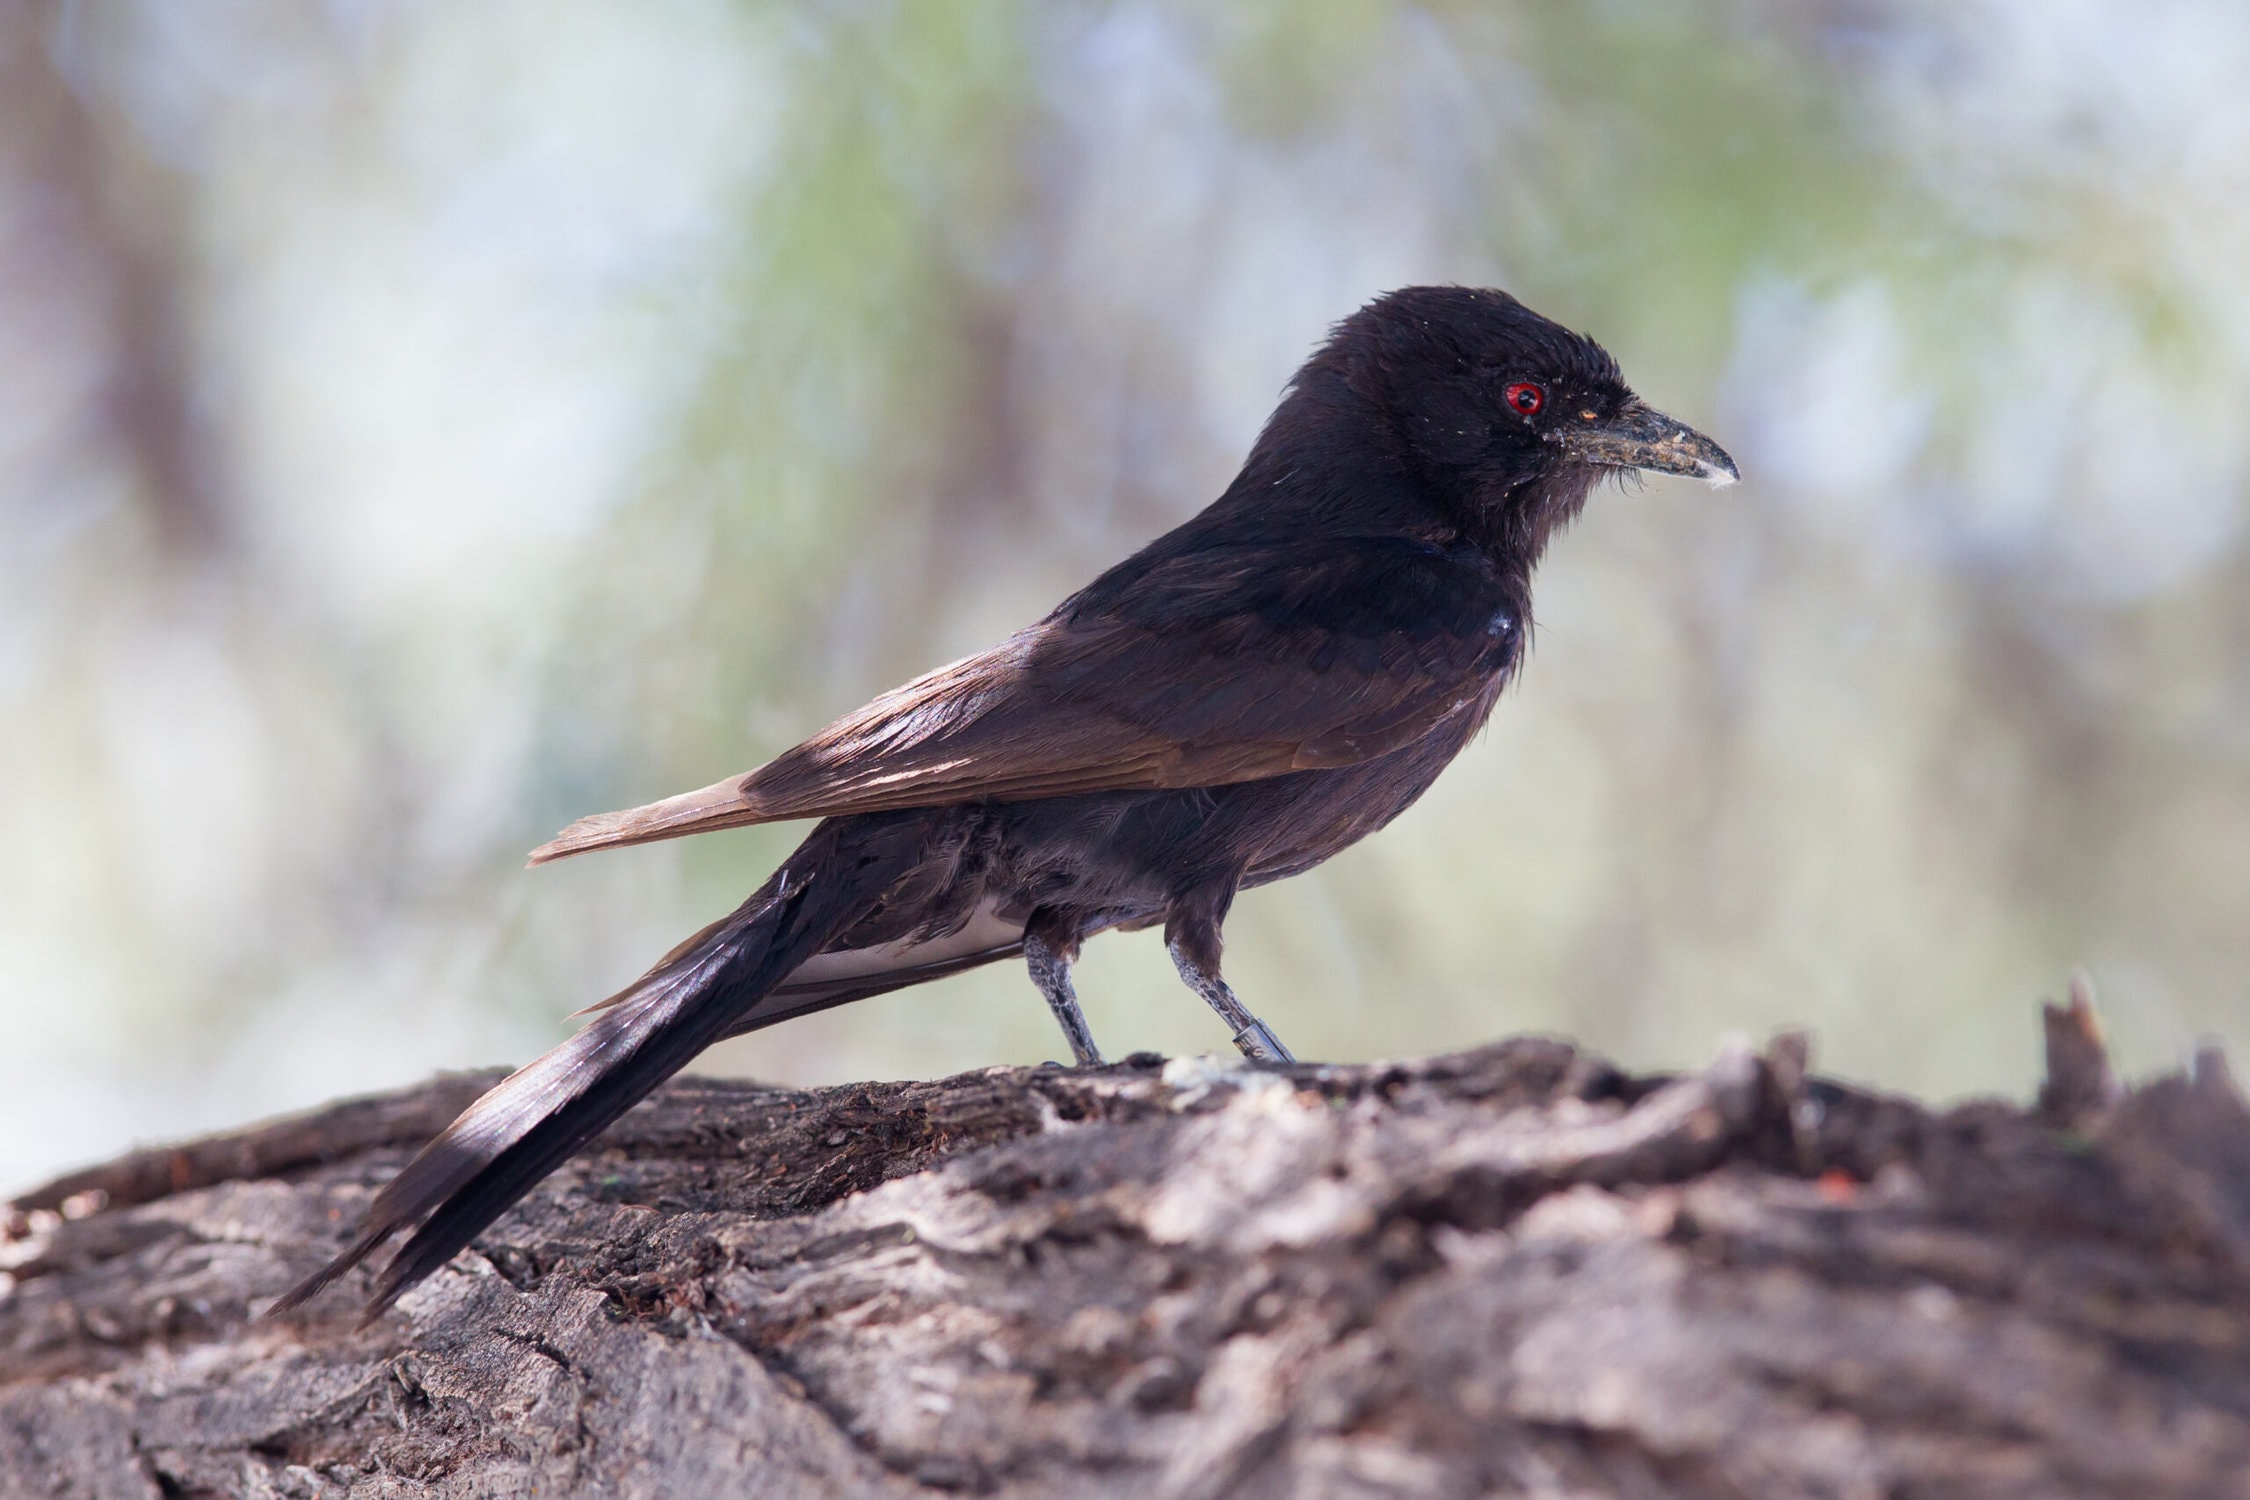 Species Highlight: The Fork-tailed Drongo